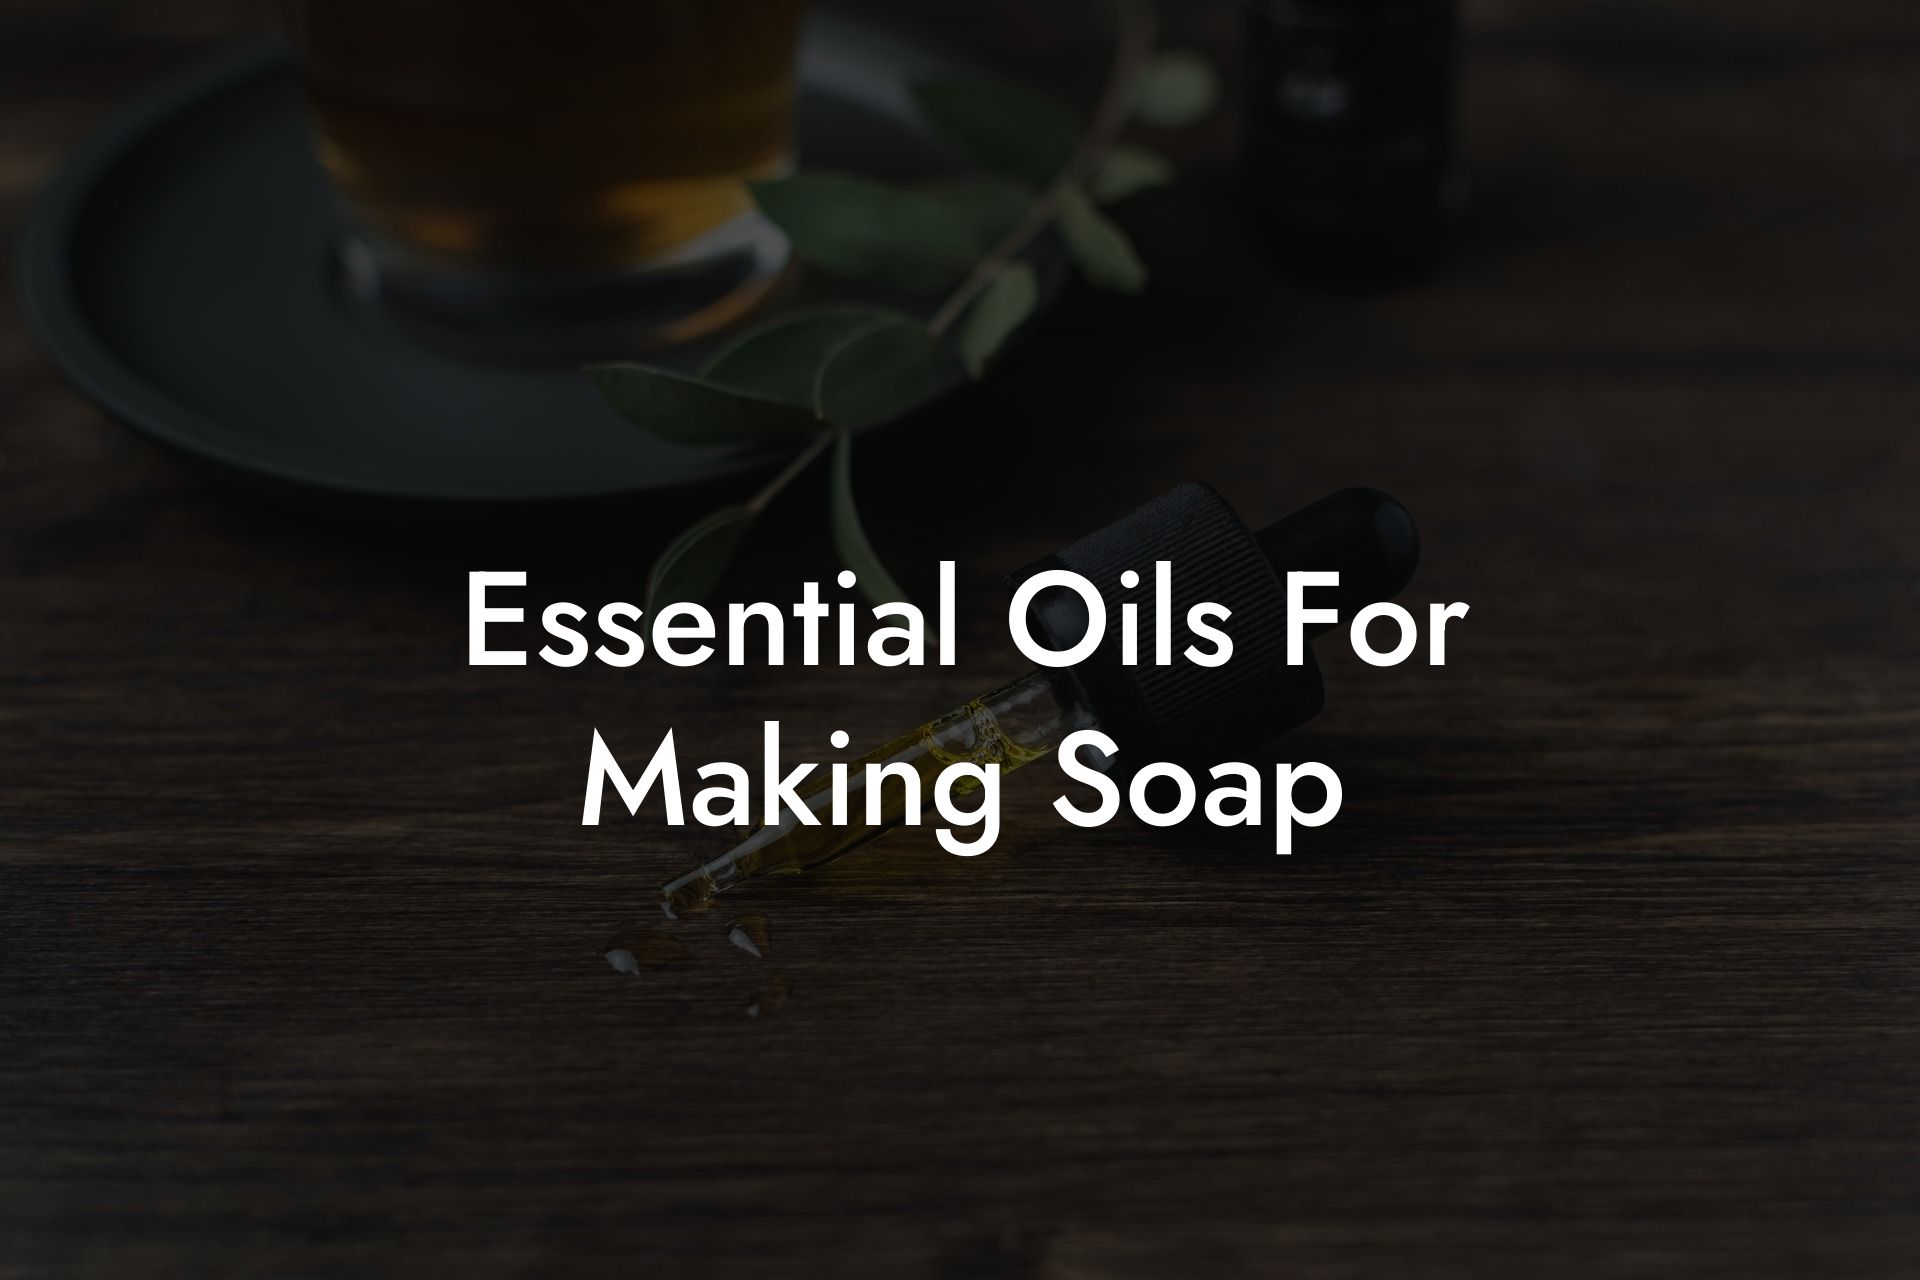 Essential Oils For Making Soap